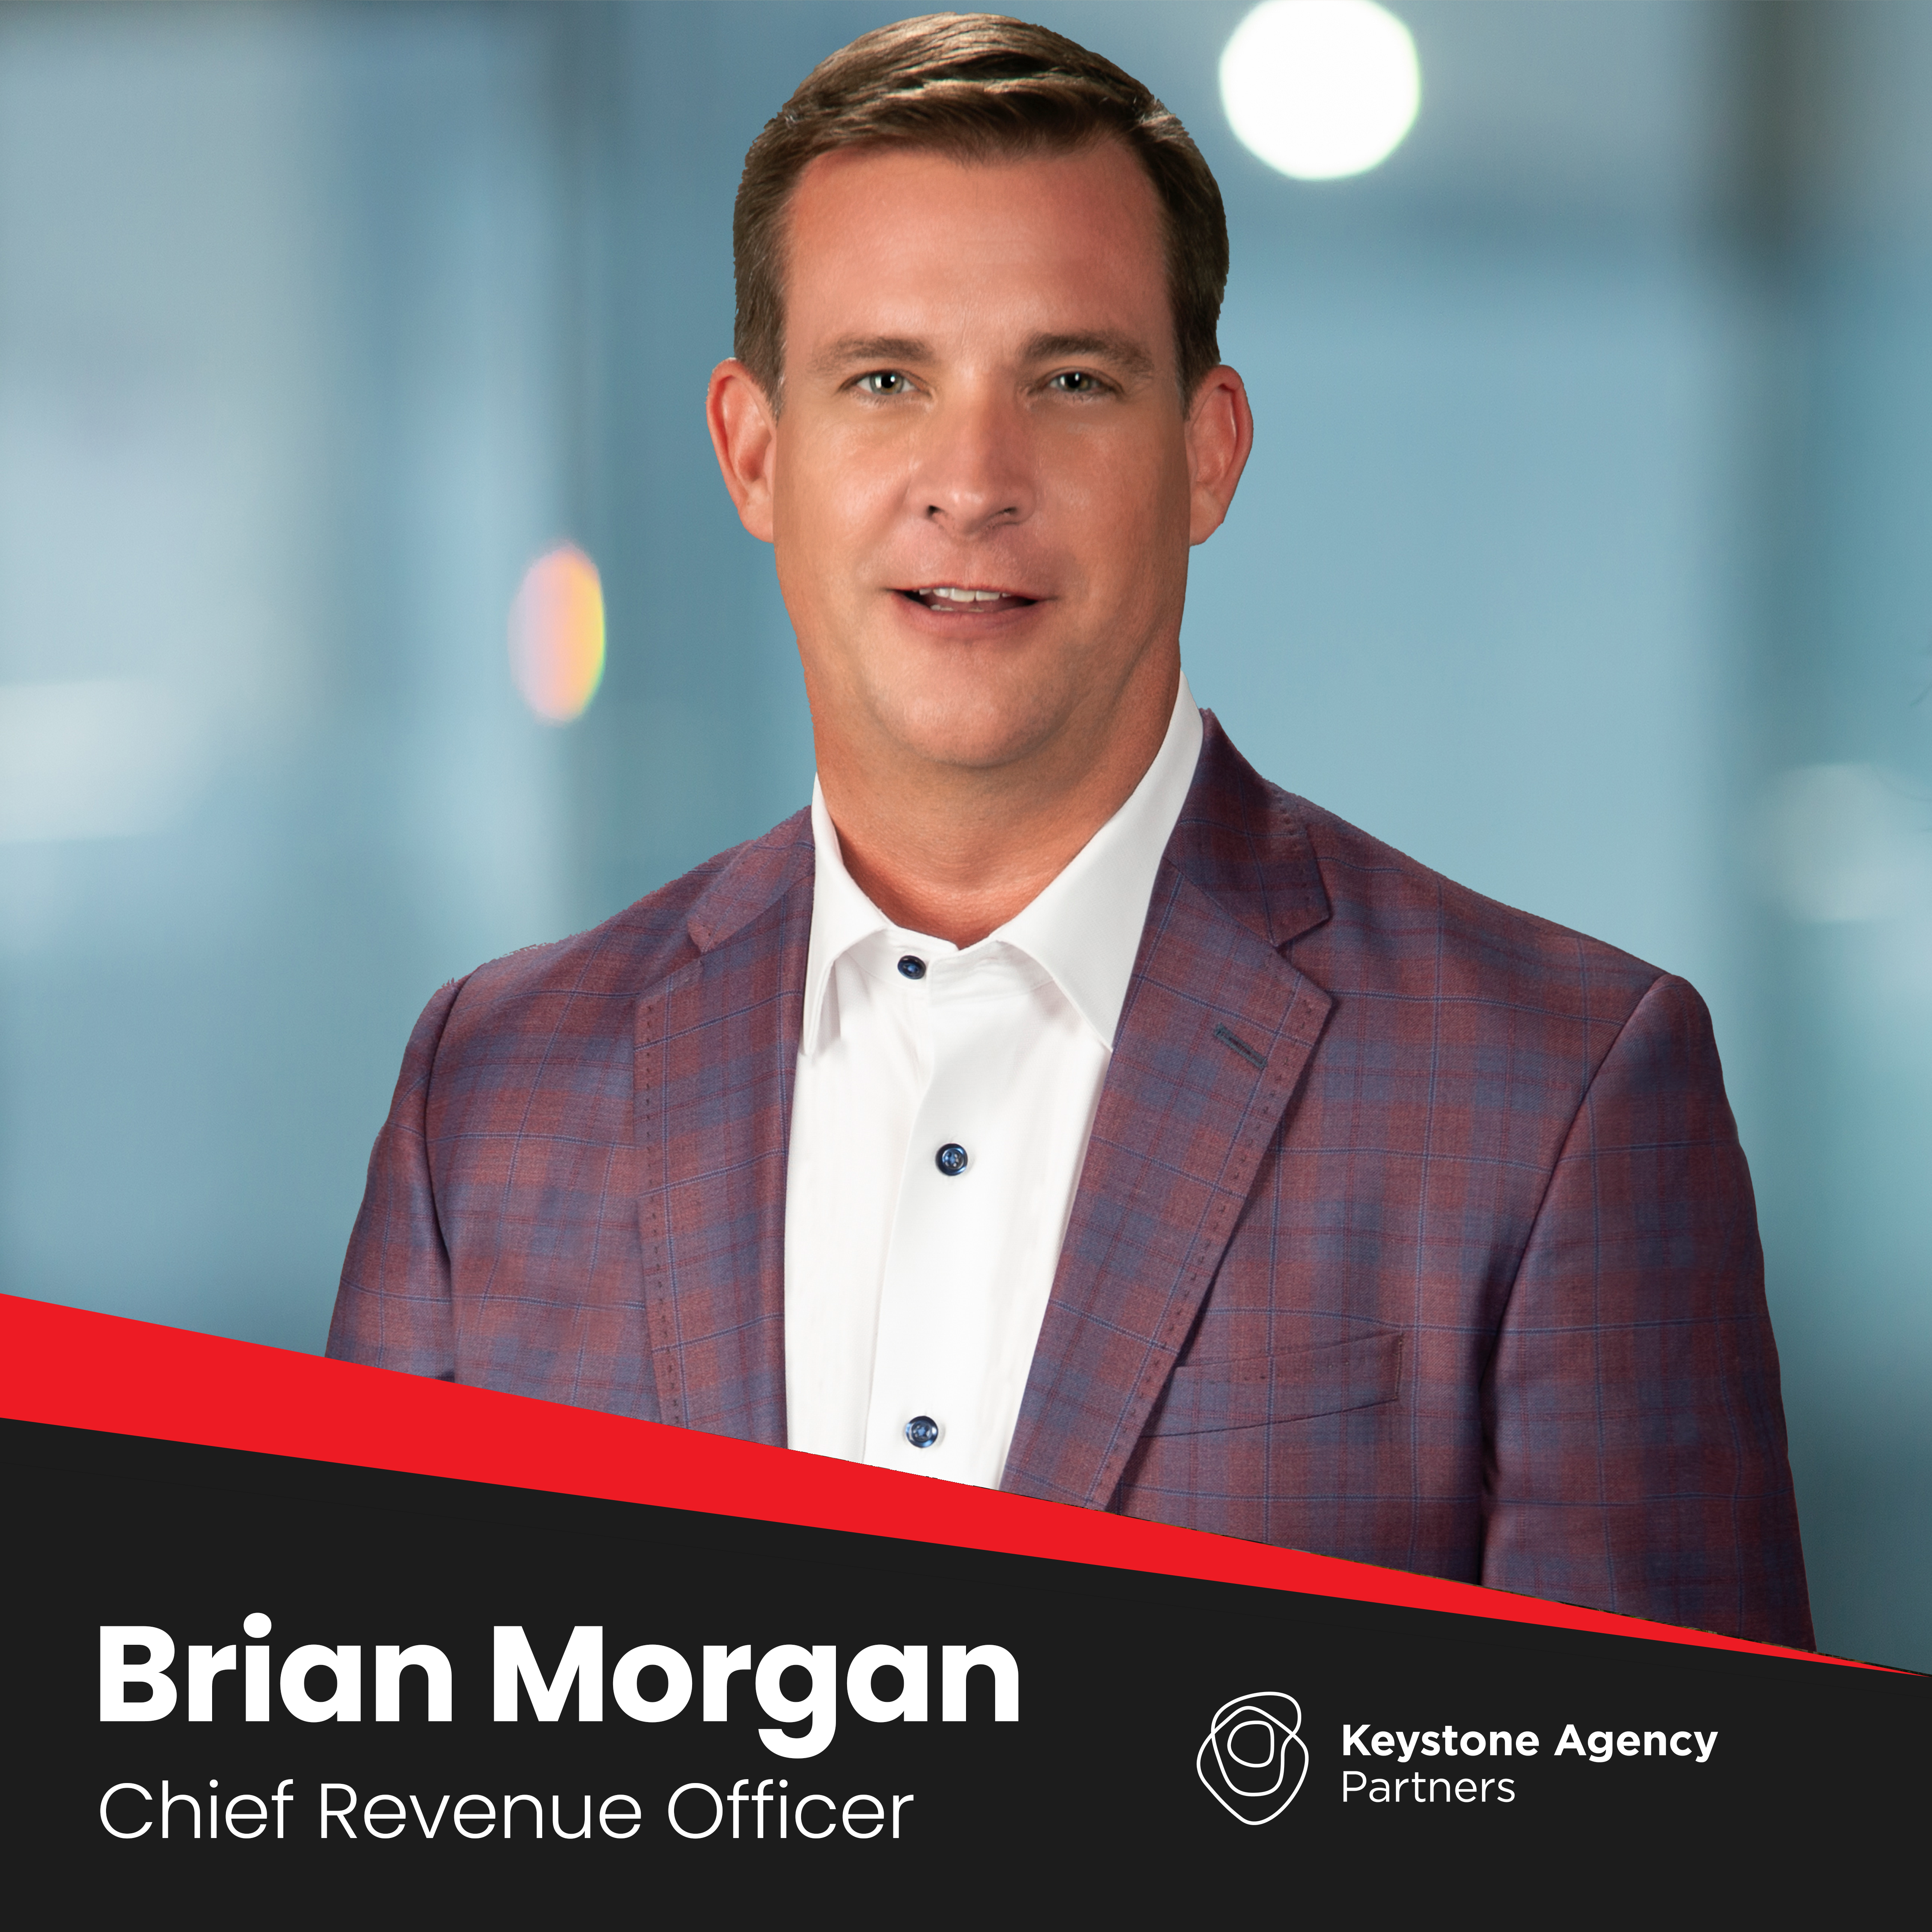 Keystone Agency Partners Appoints Brian Morgan as Chief Revenue Officer